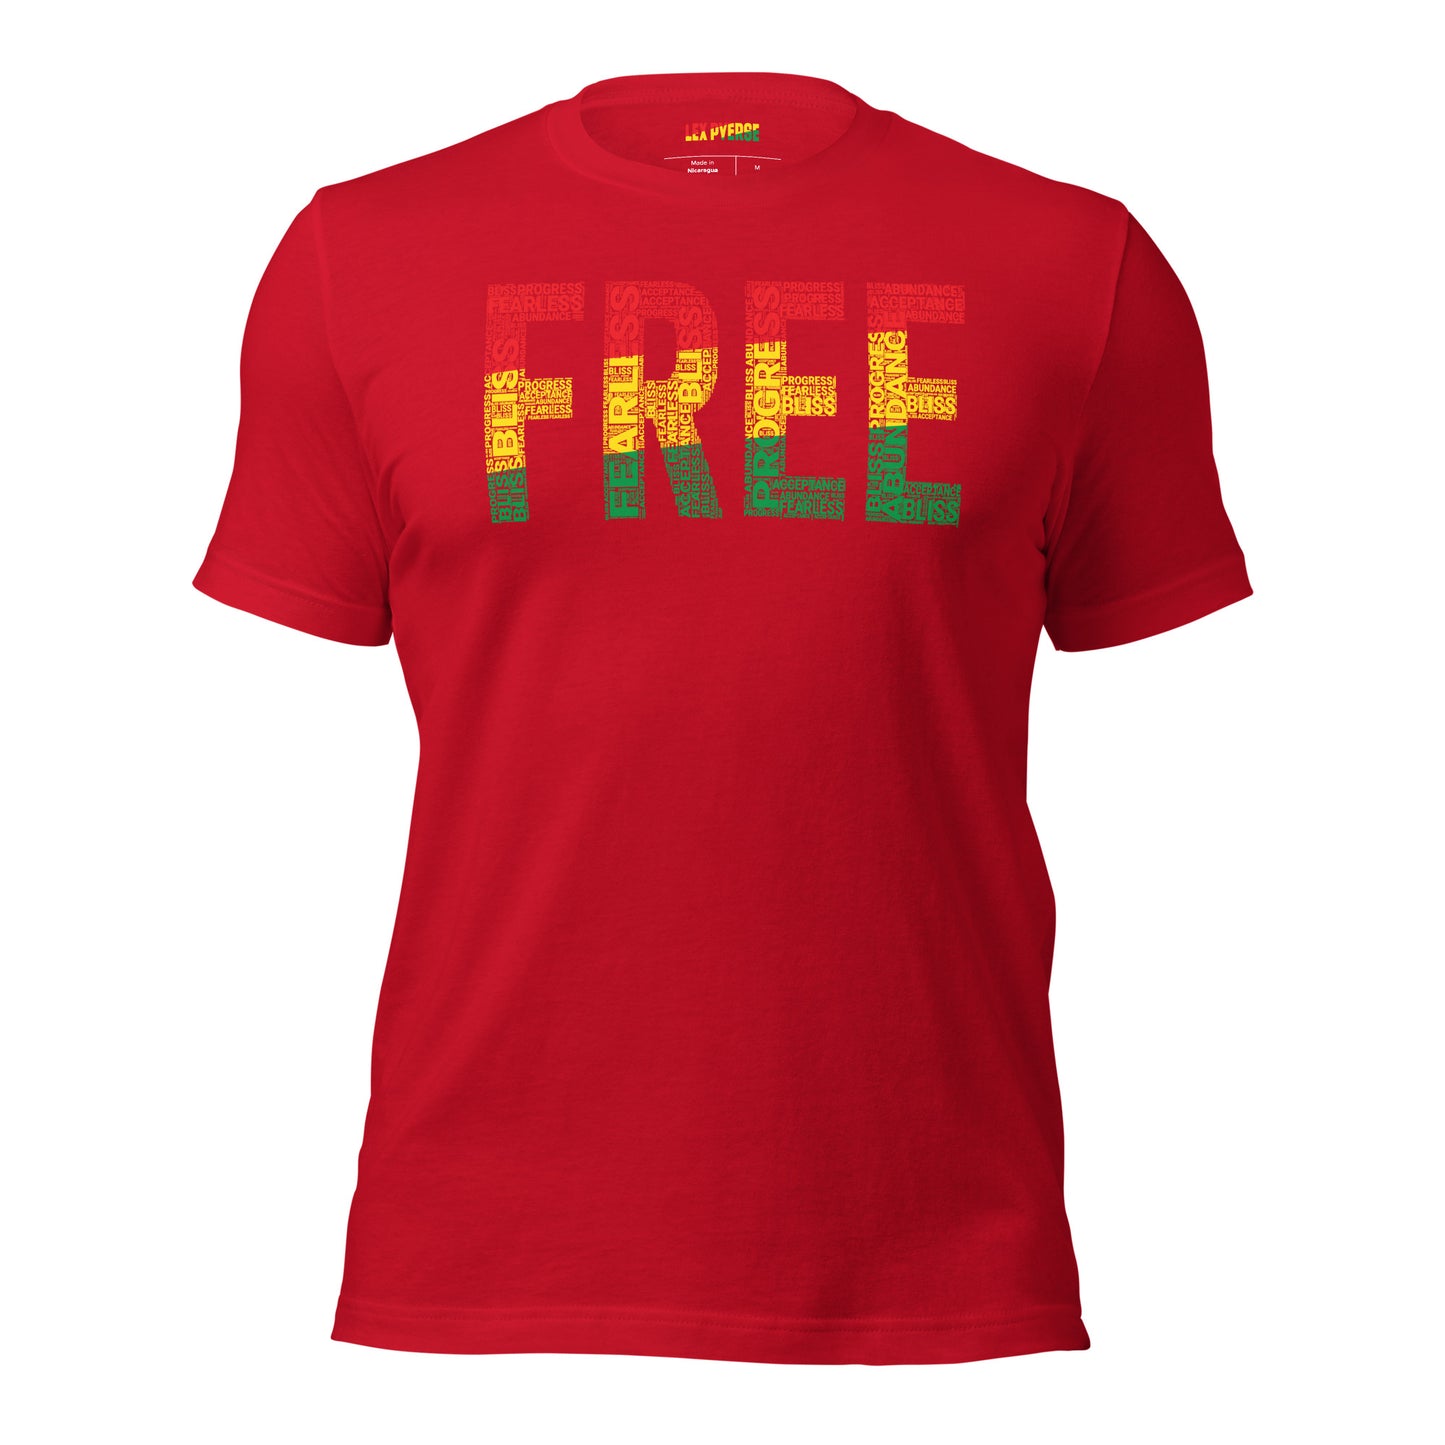 "FREE"  Pan-African Colored Word Cluster Short-Sleeve Unisex T-Shirt